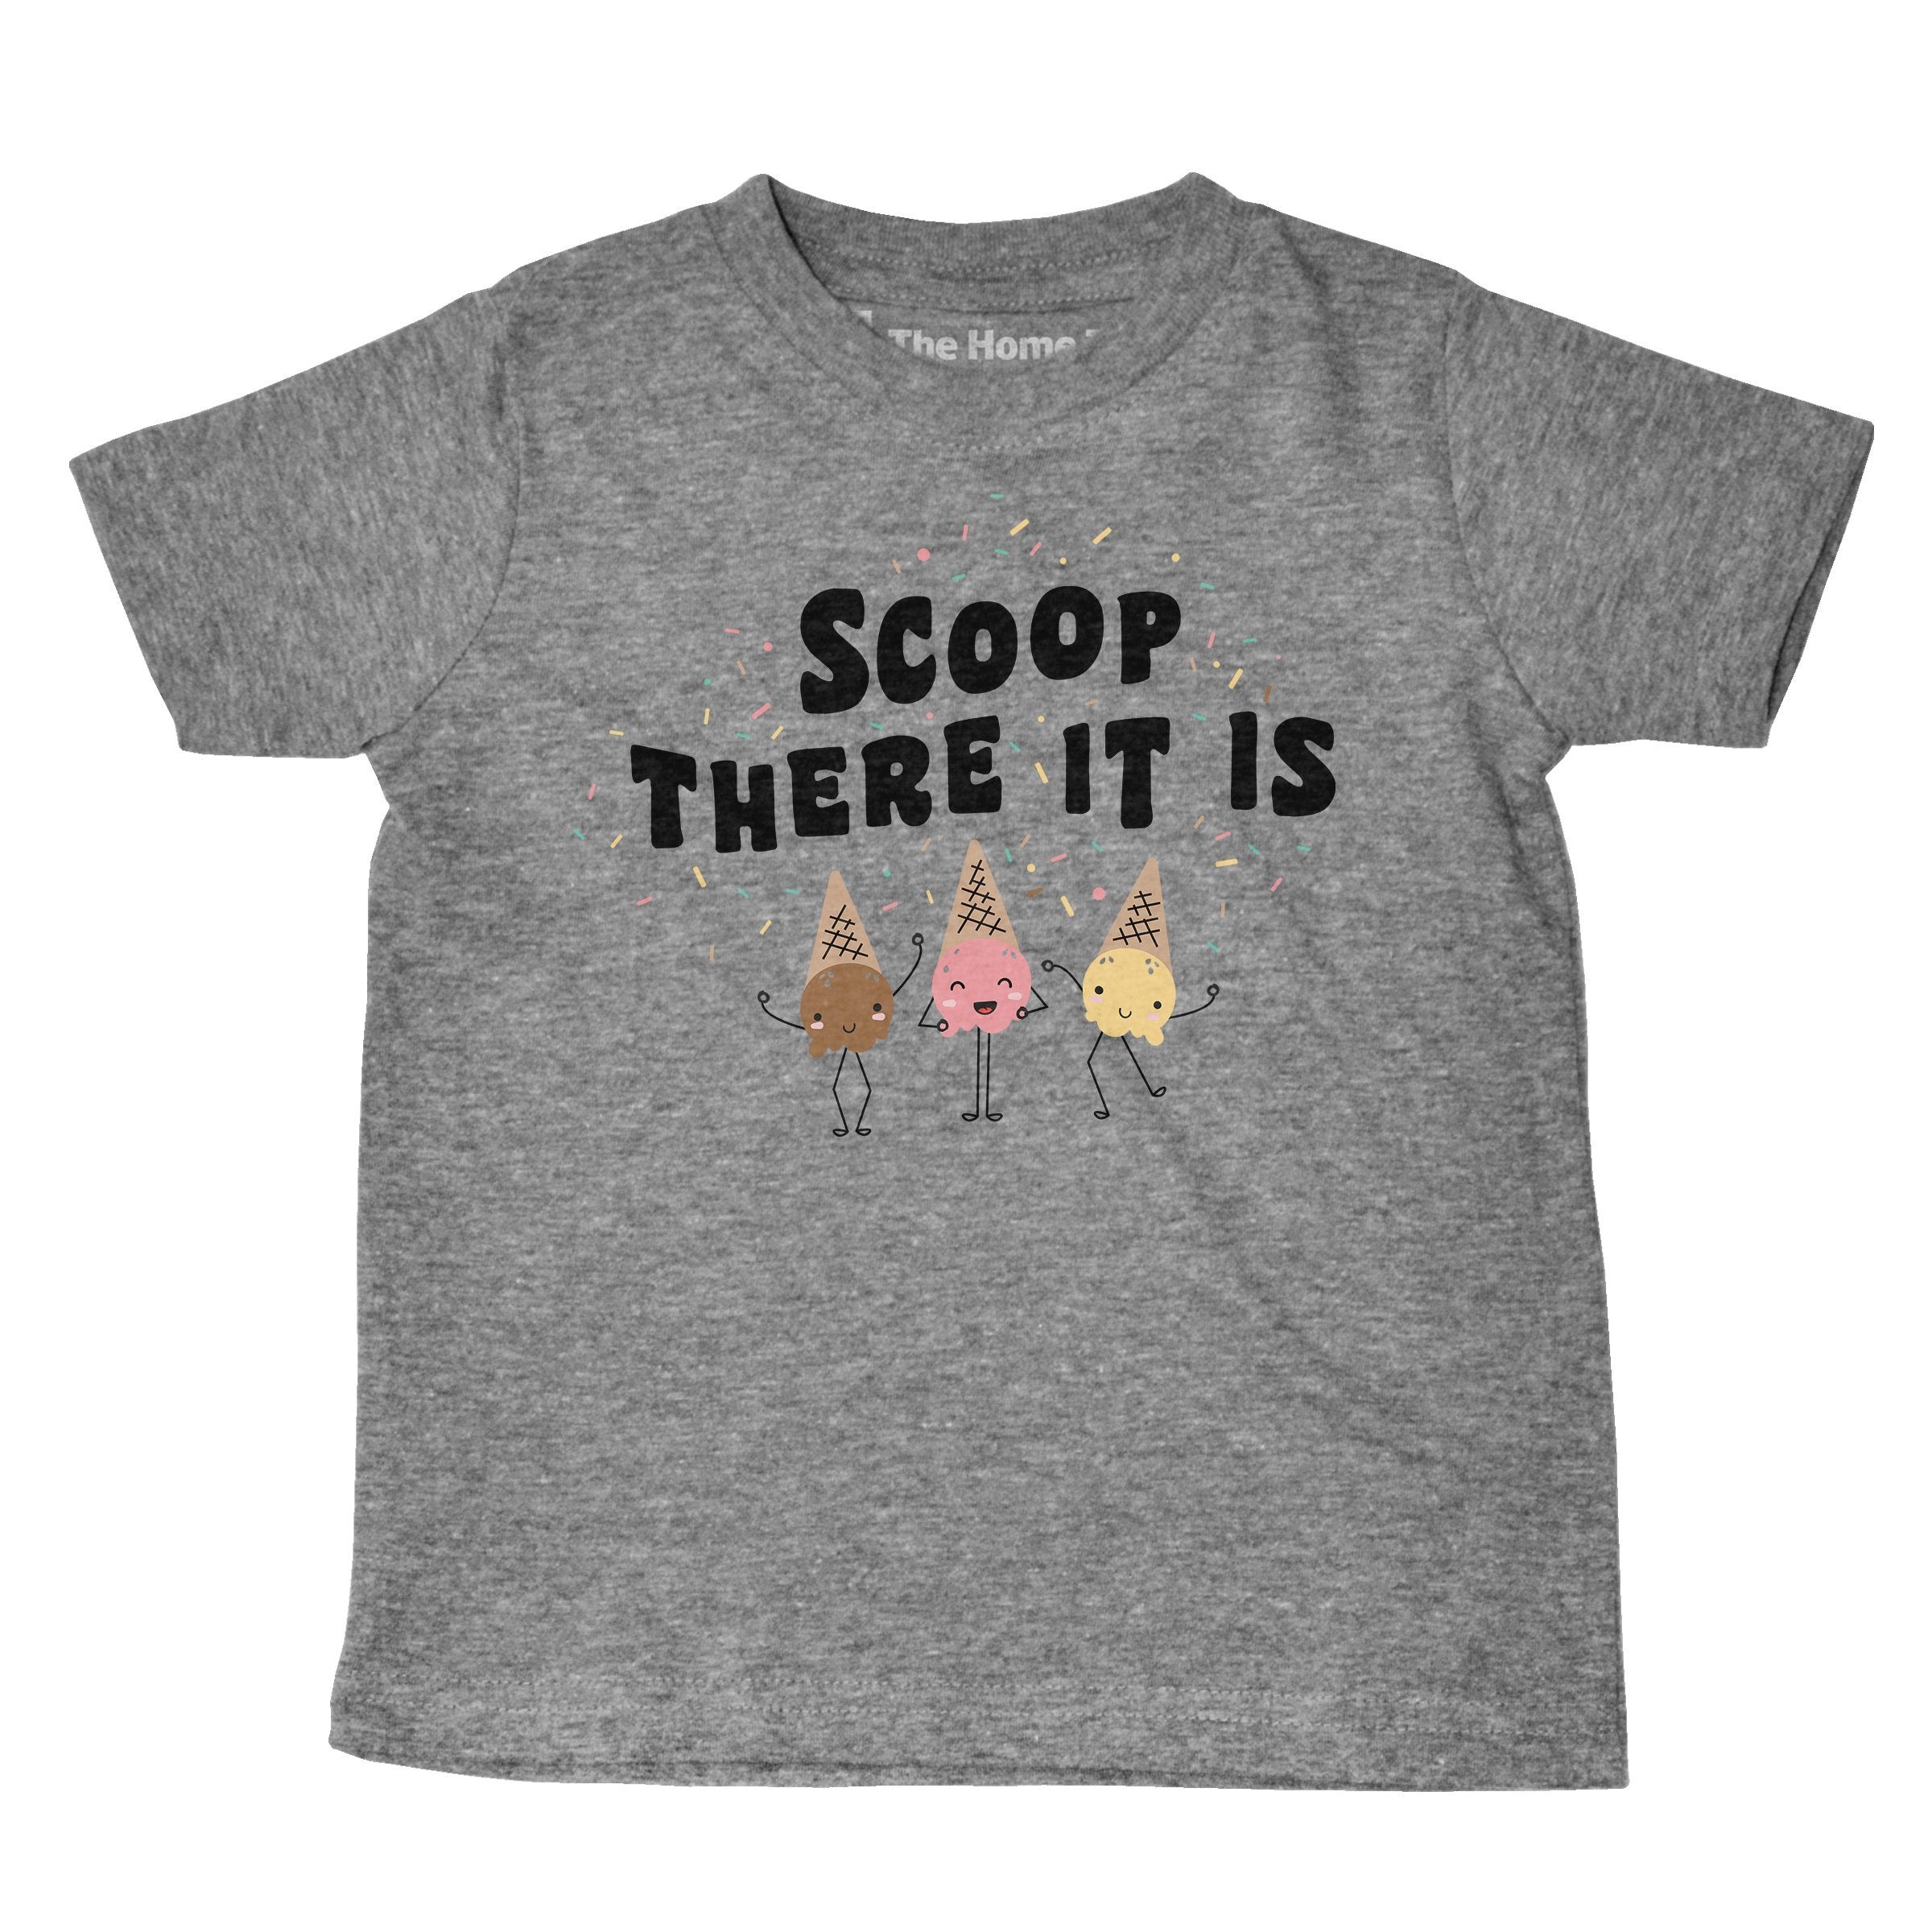 Scoop there it is kids athletic grey crewneck